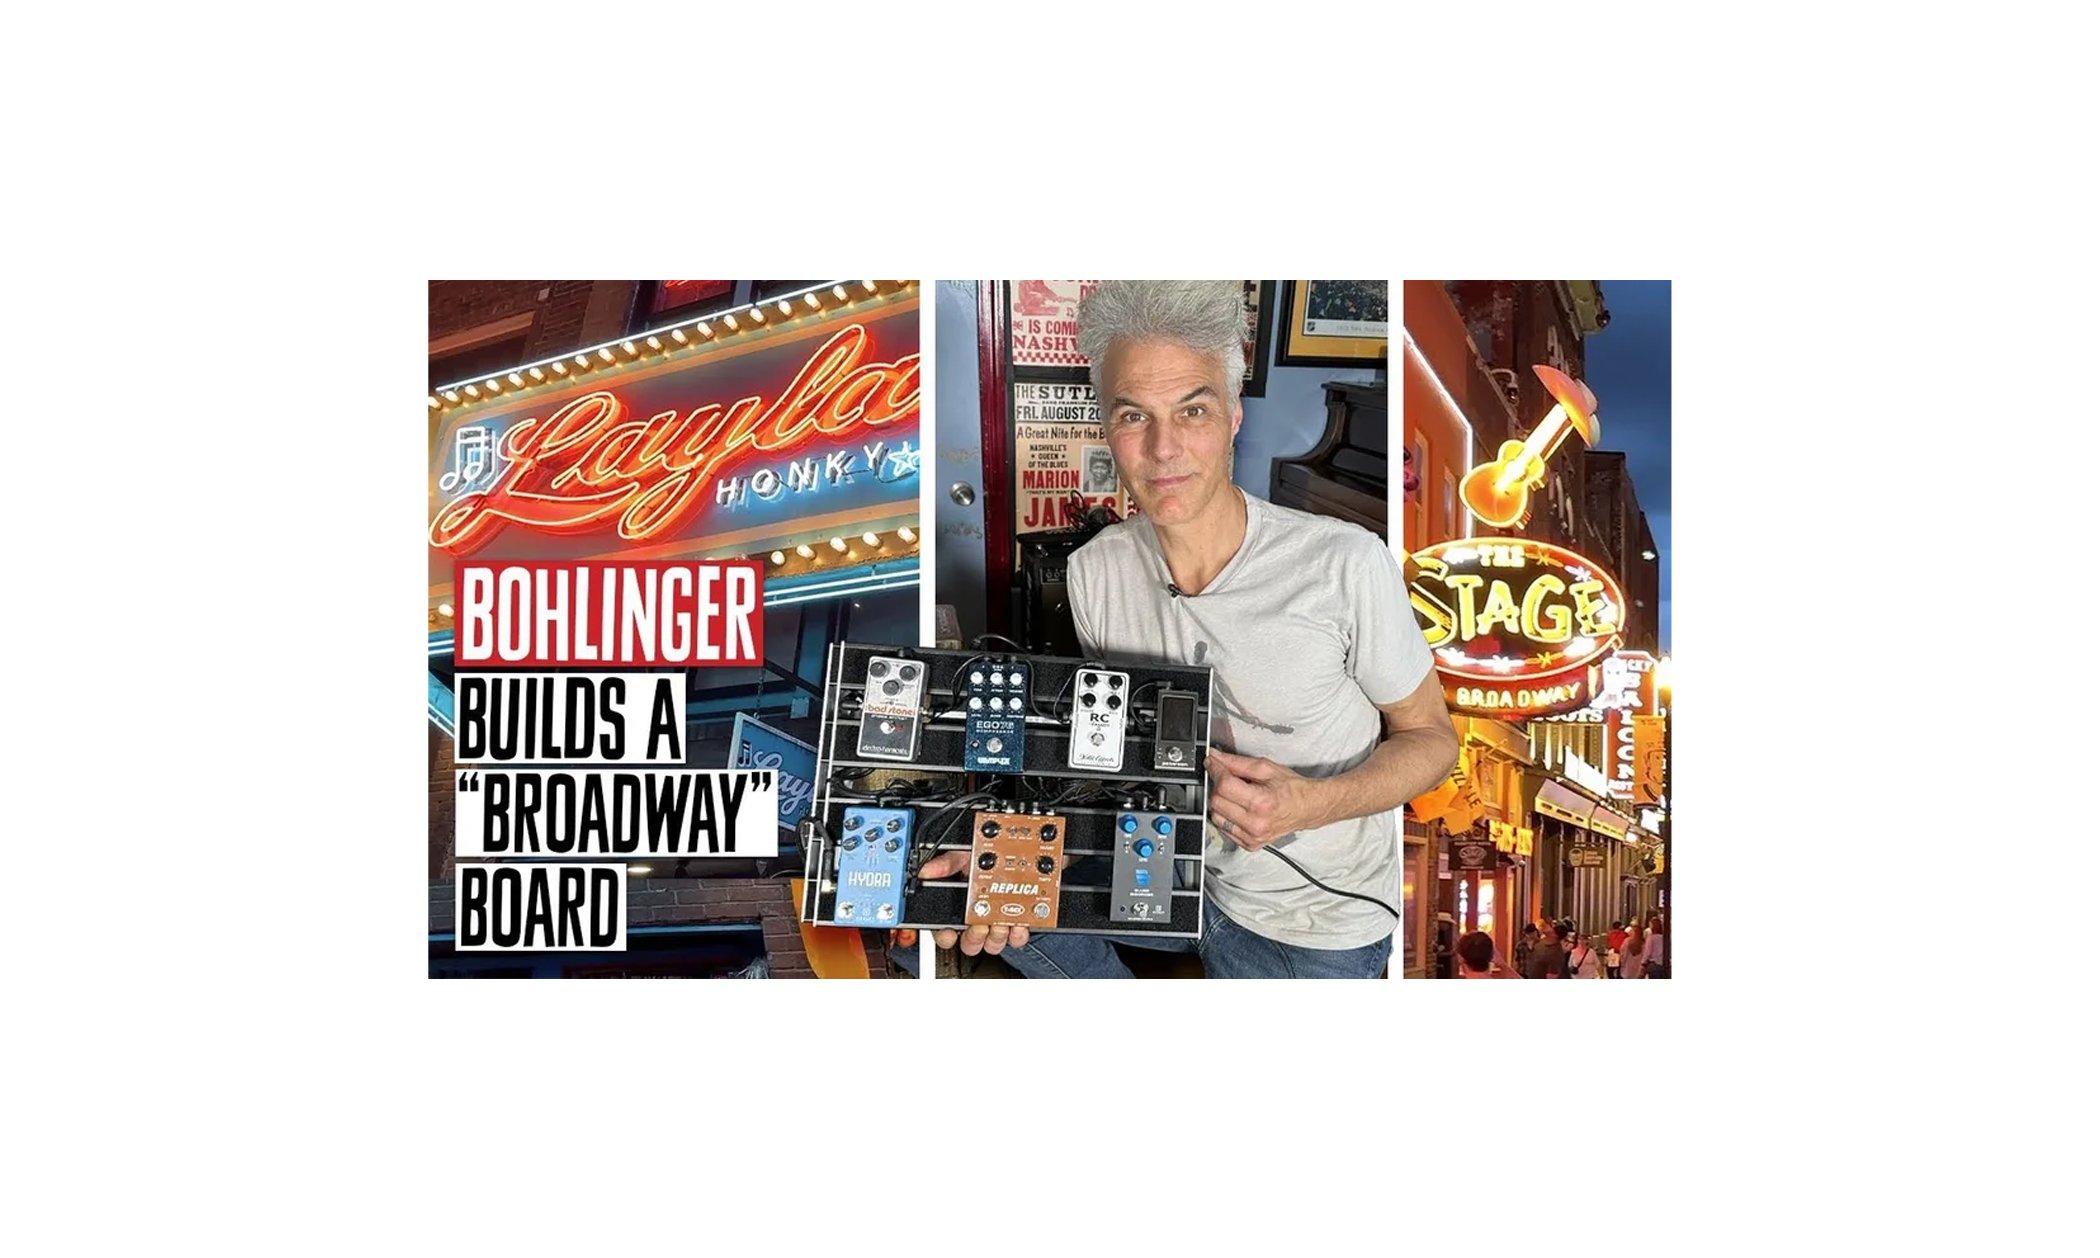 Enter for a Chance to Win a Bohlinger’s Broadway Pedalboard!